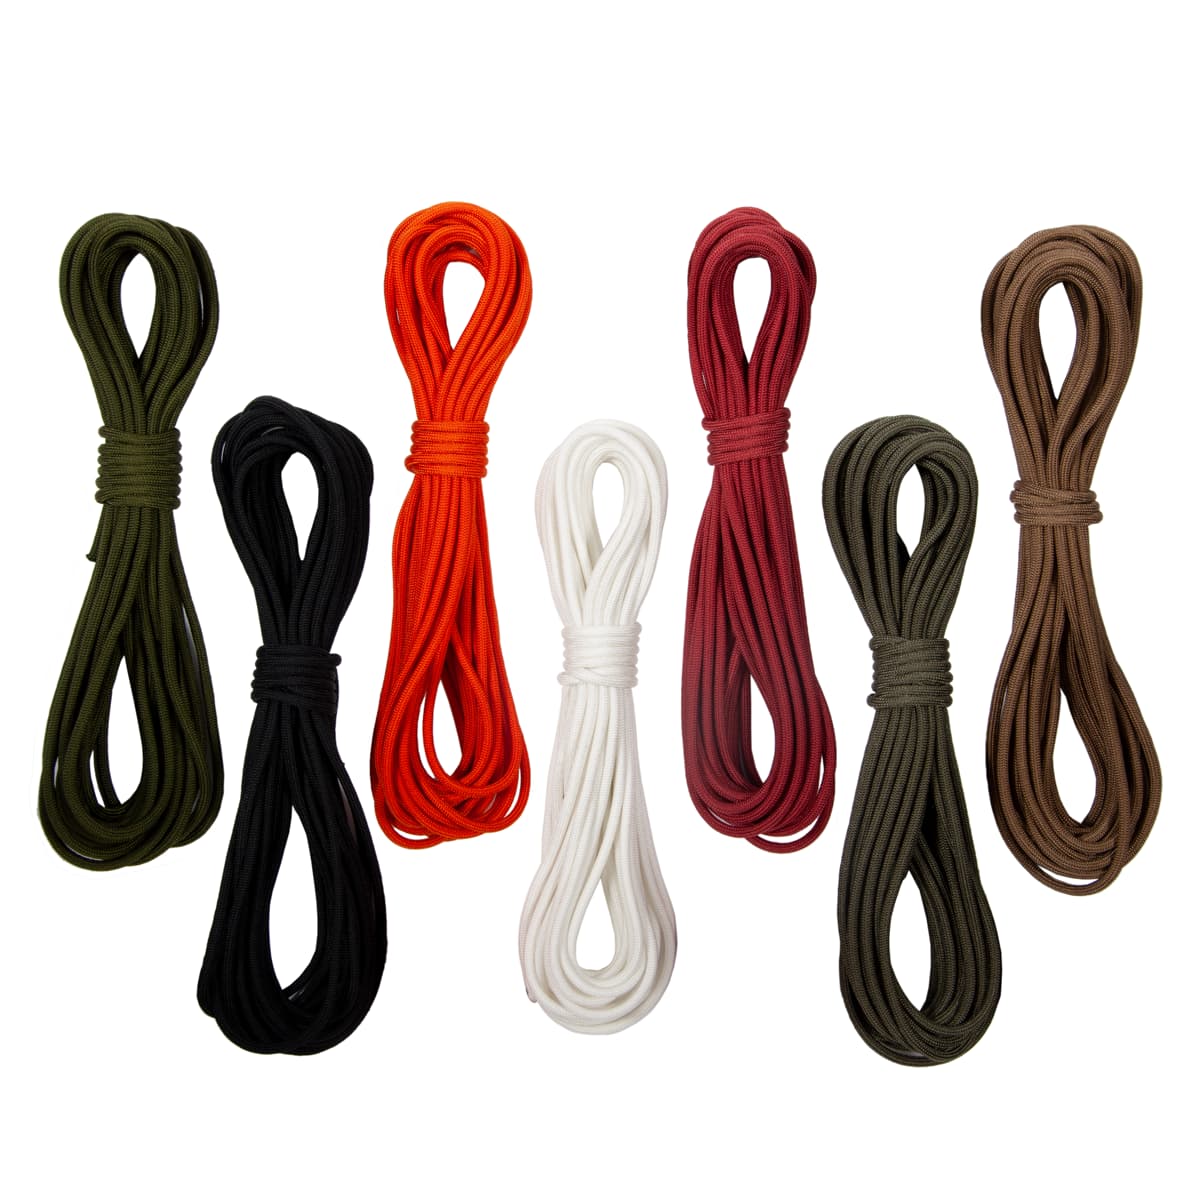 Core Paracord, 4mm Paracord Red Paracord 50M 4MM Thick 7 Core Red Paracord  Rescue Tying Tent